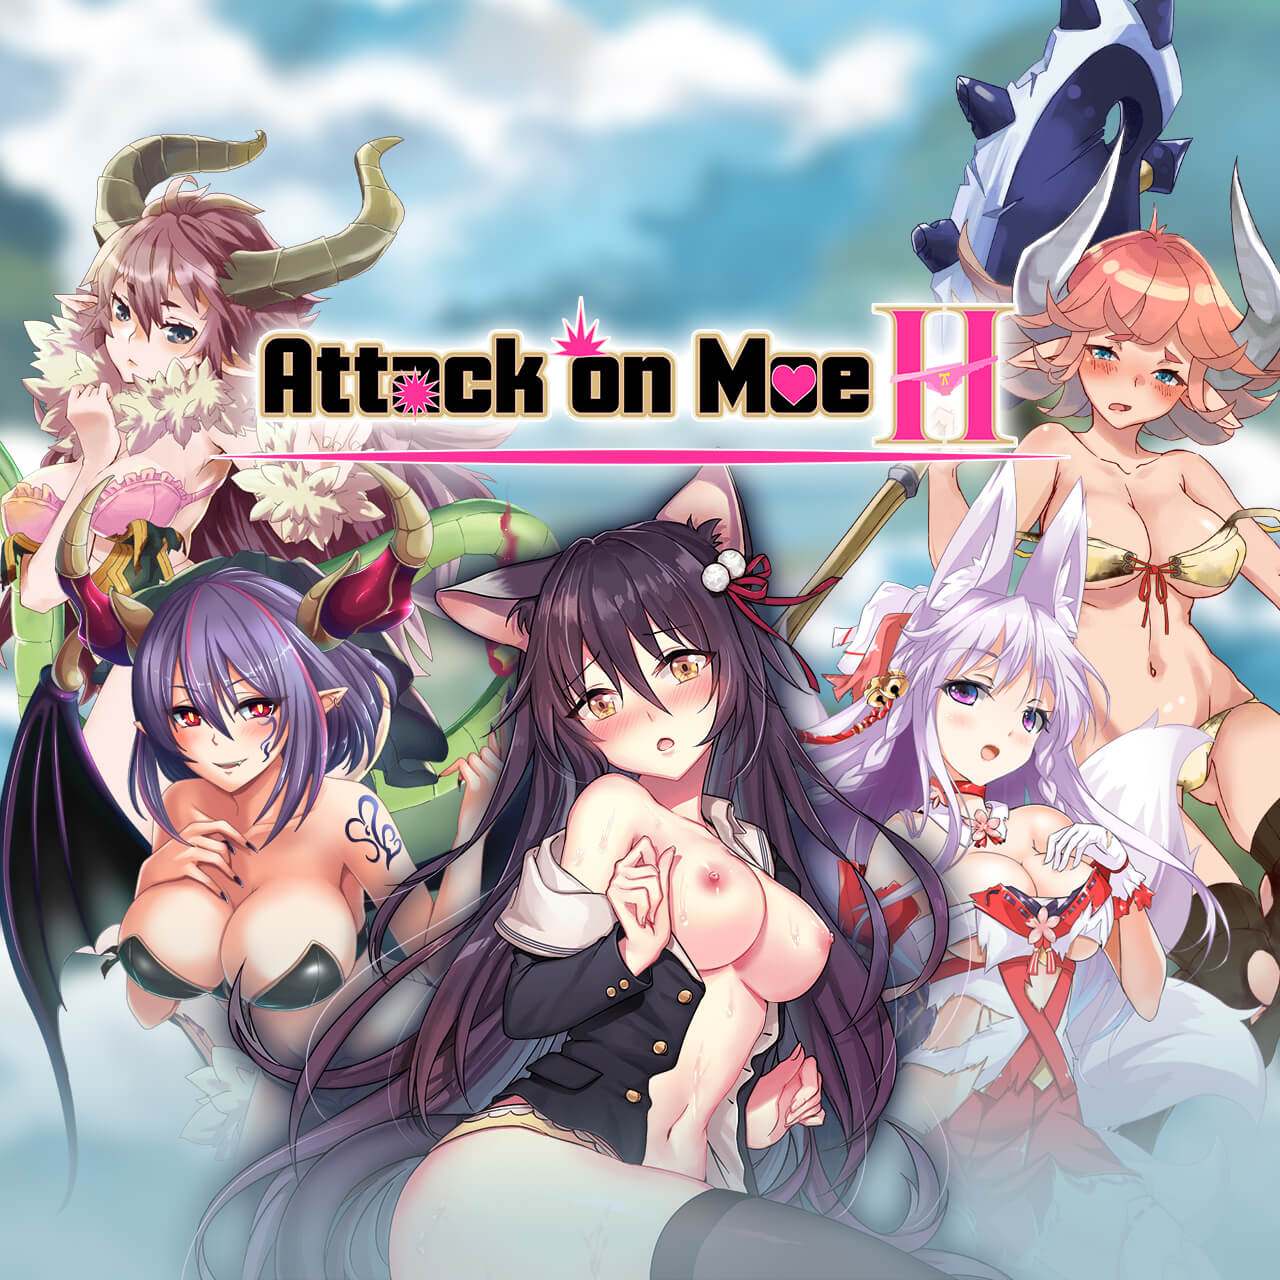 Hentai Gameplay - Attack On Moe H - Clicker Sex Game with APK file | Nutaku